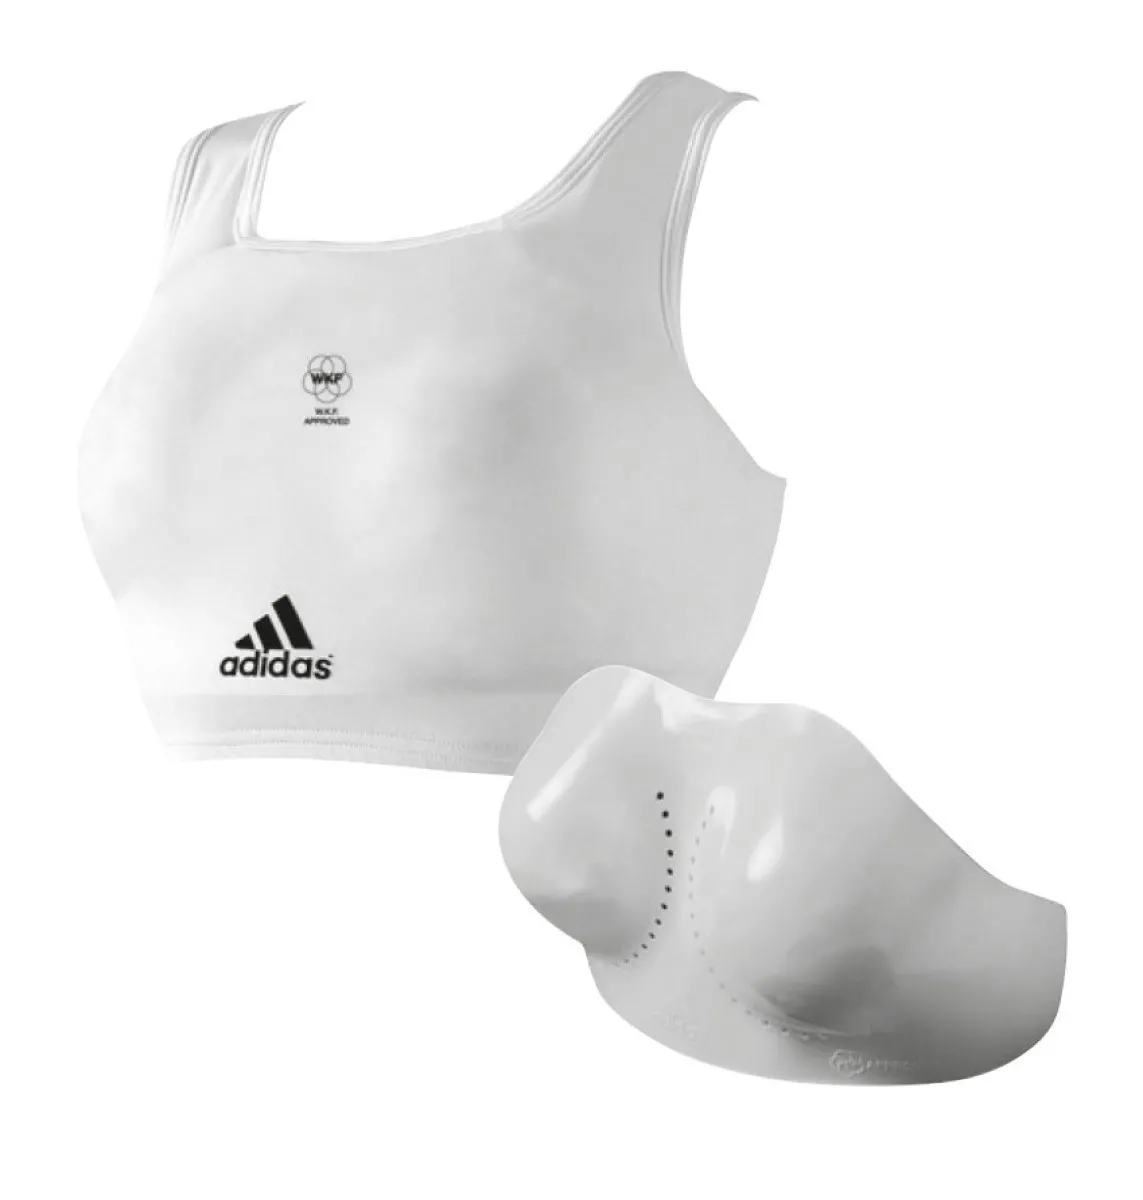 Protège-poitrine adidas pour femmes WKF approved